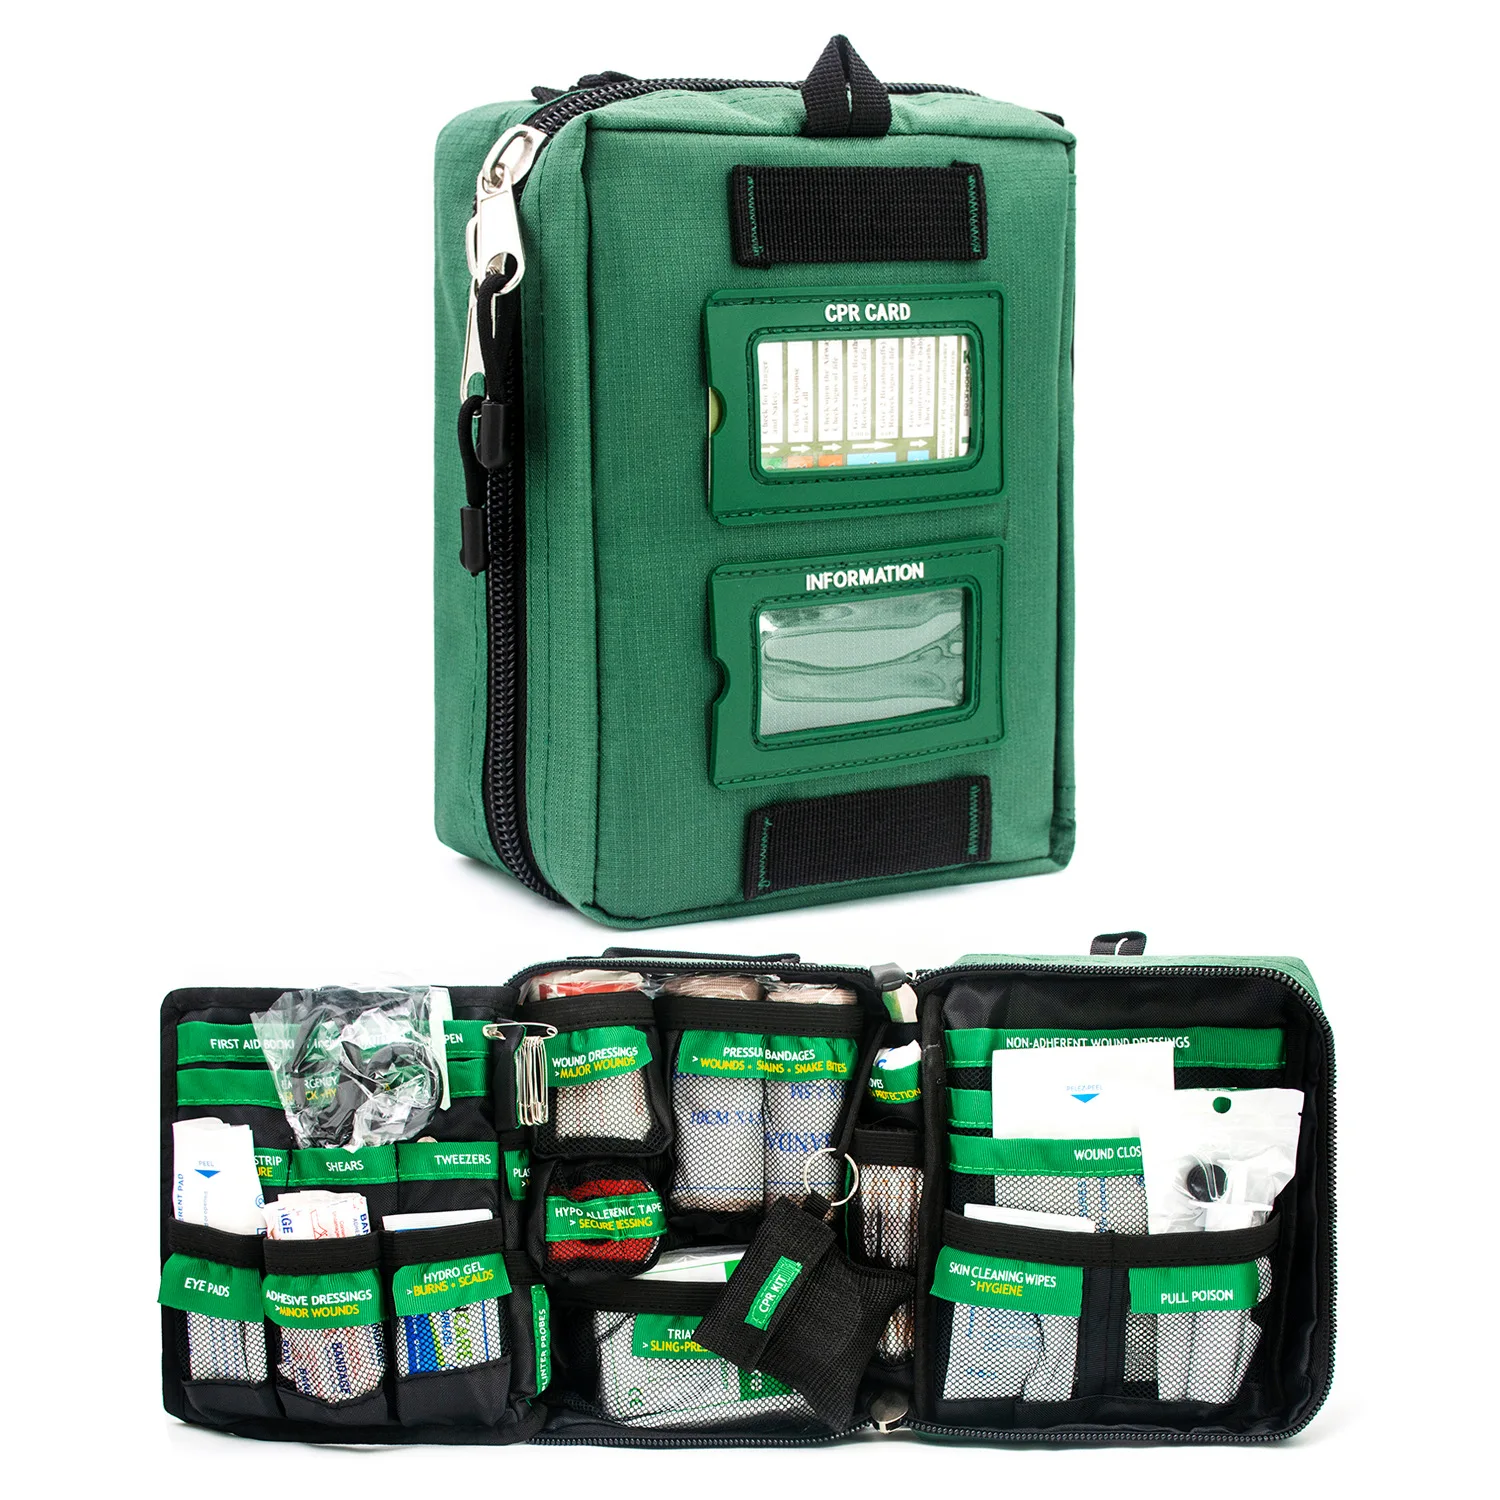 First Aid Kit Bag  Emergency Medical Rescue Survival Kits Outdoors Hiking Survival Kits Handy First Aid Kit Bag